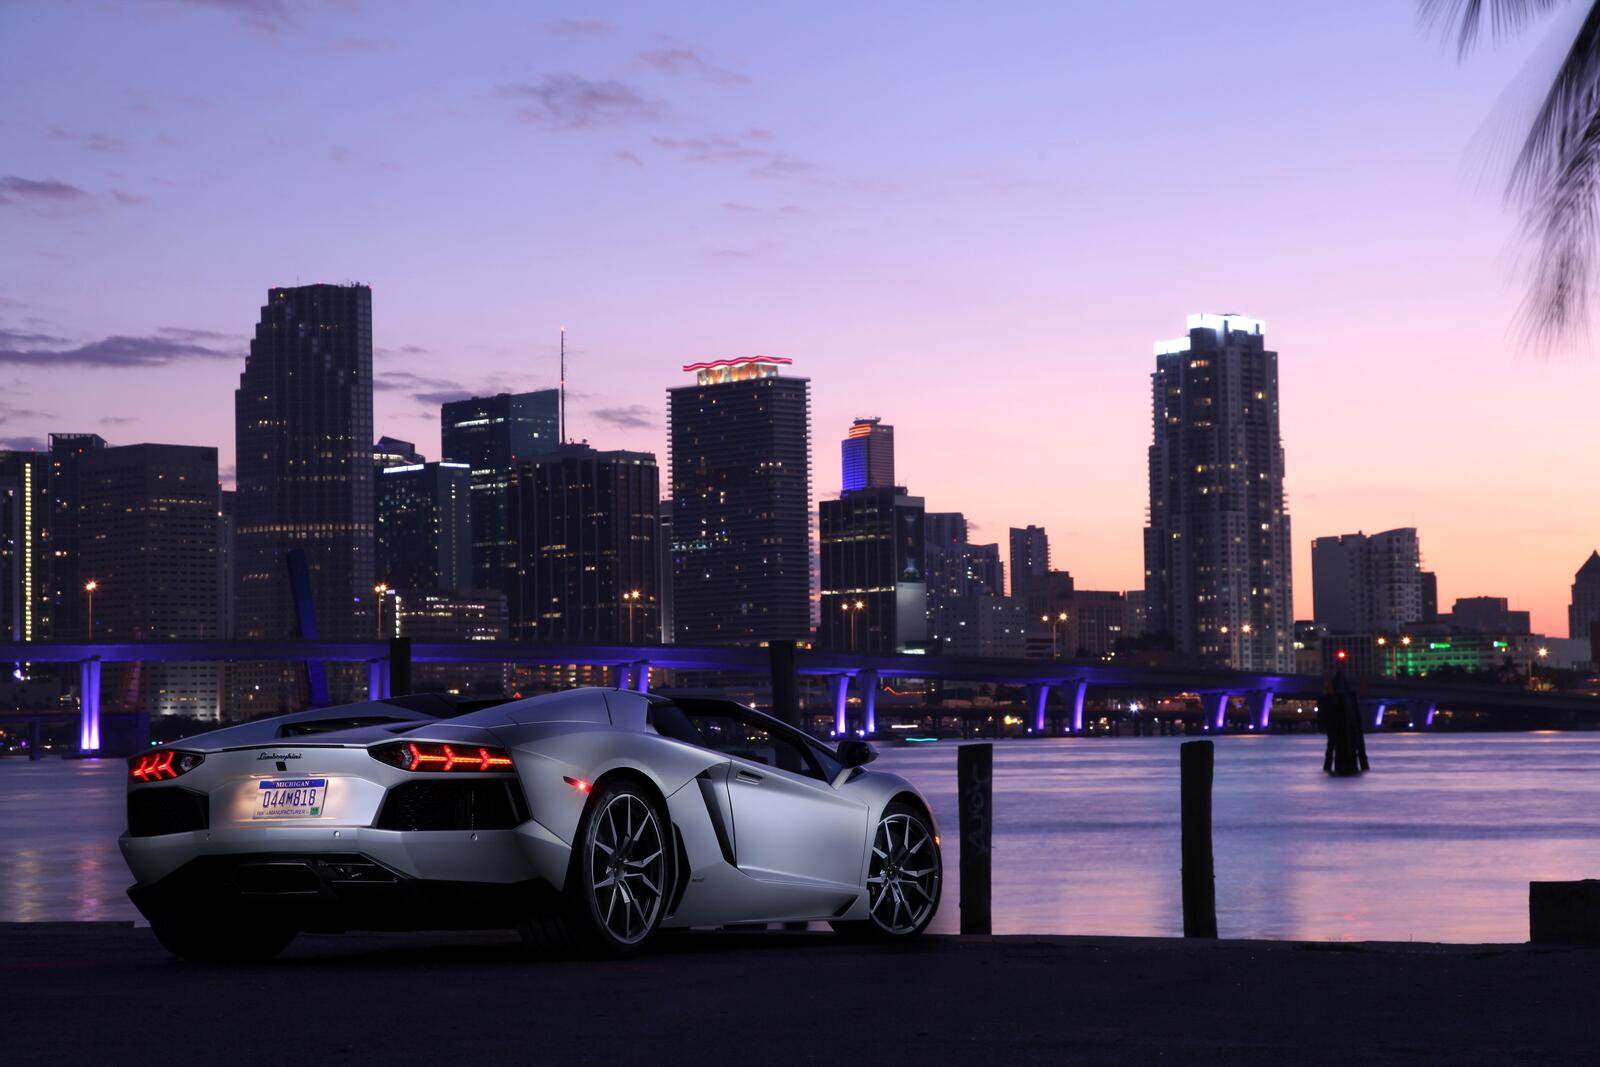 Wallpapers wallpaper lamborghini aventador view from behind cityscape on the desktop